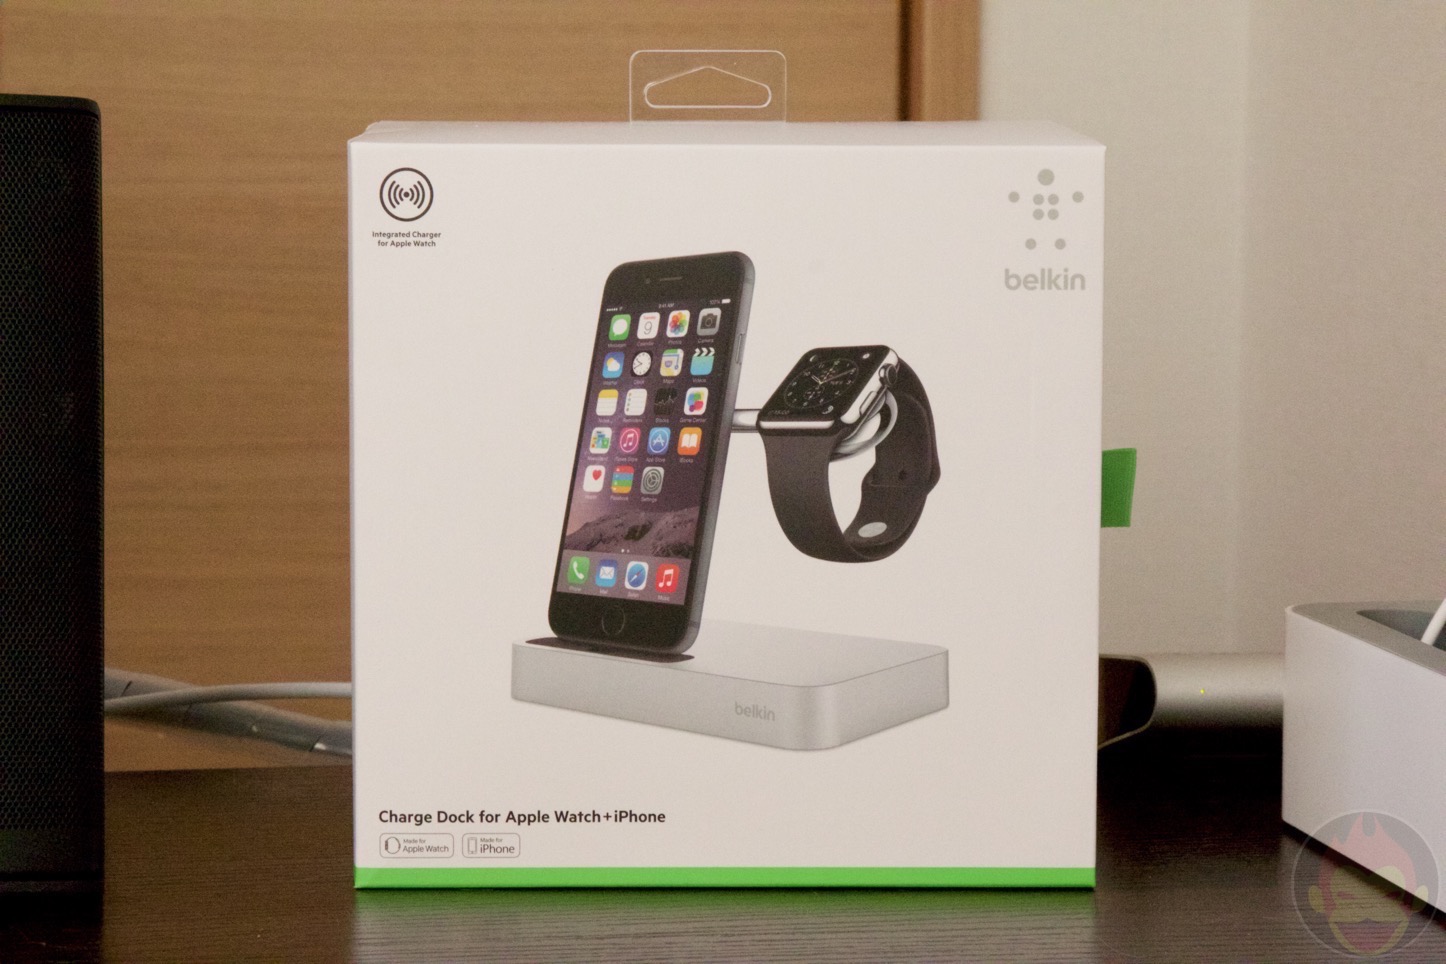 Belkin-Charge-Dock-for-iPhone-and-Apple-Watch-01.jpg